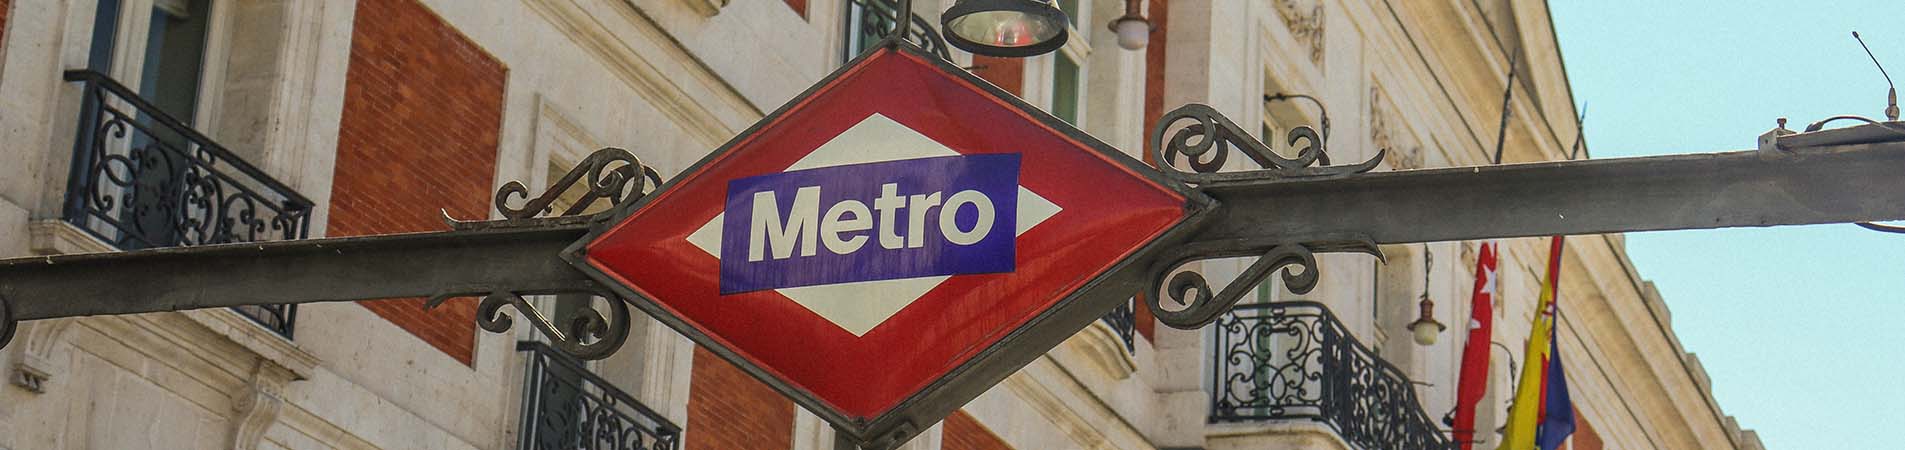 Madrid Metro and prices